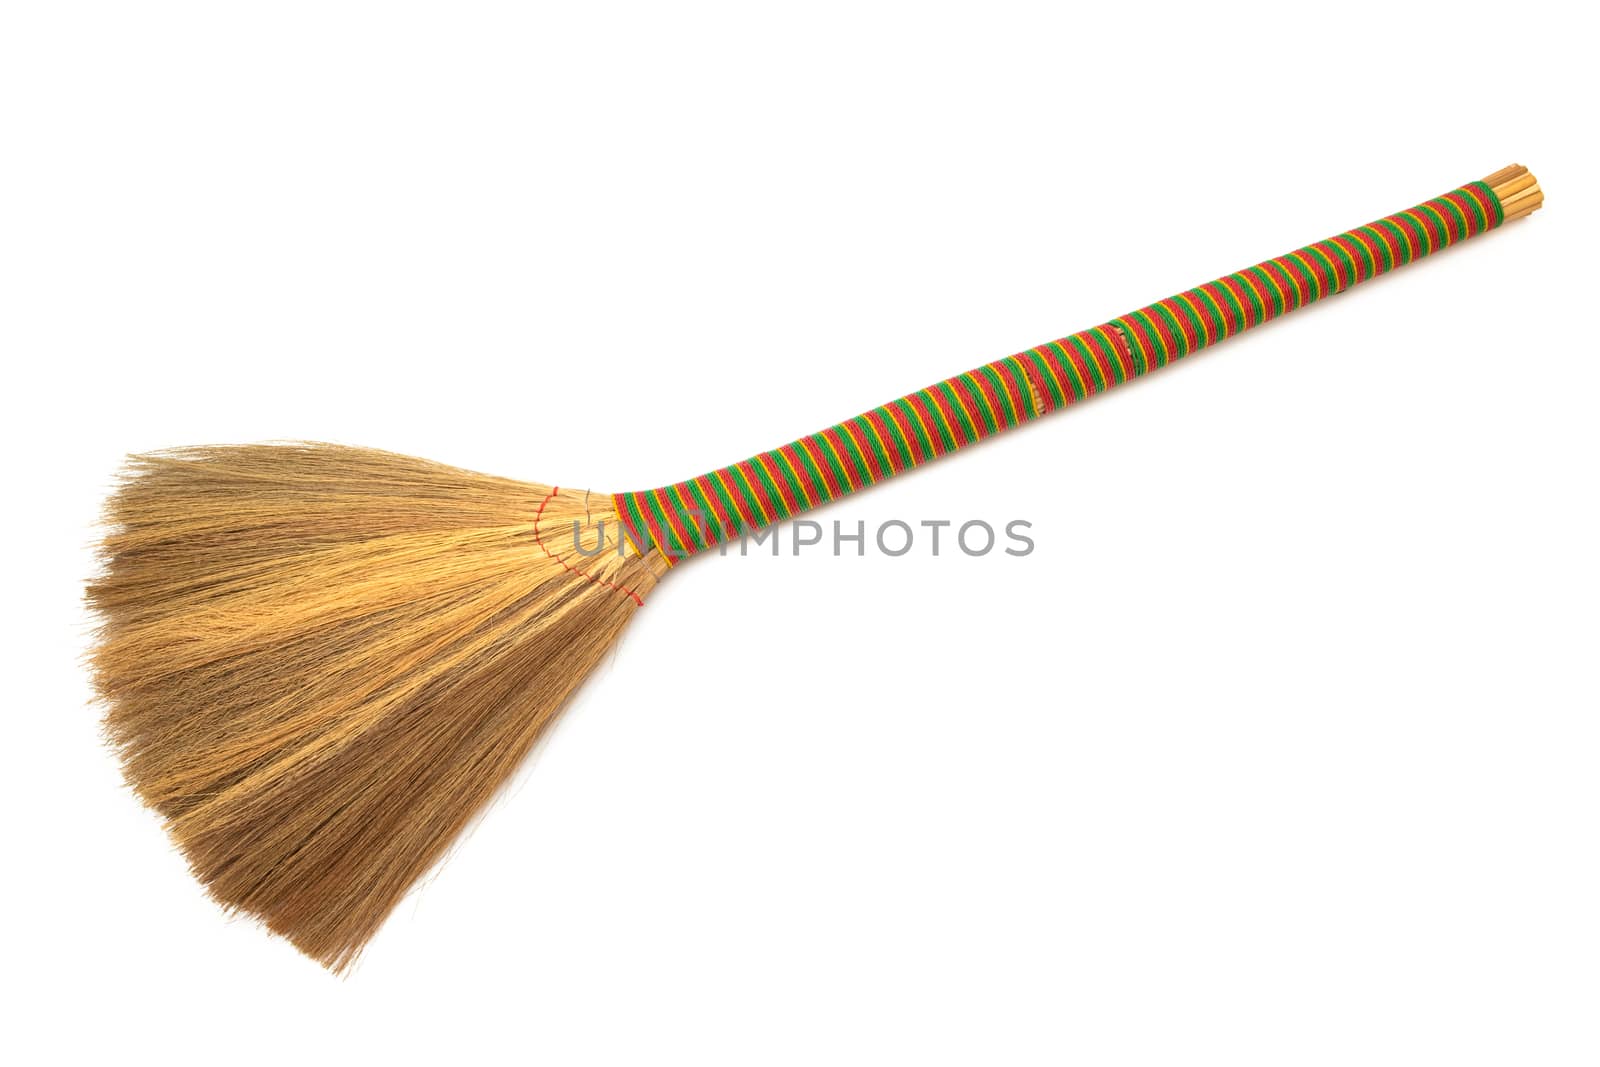 new broom on a white background